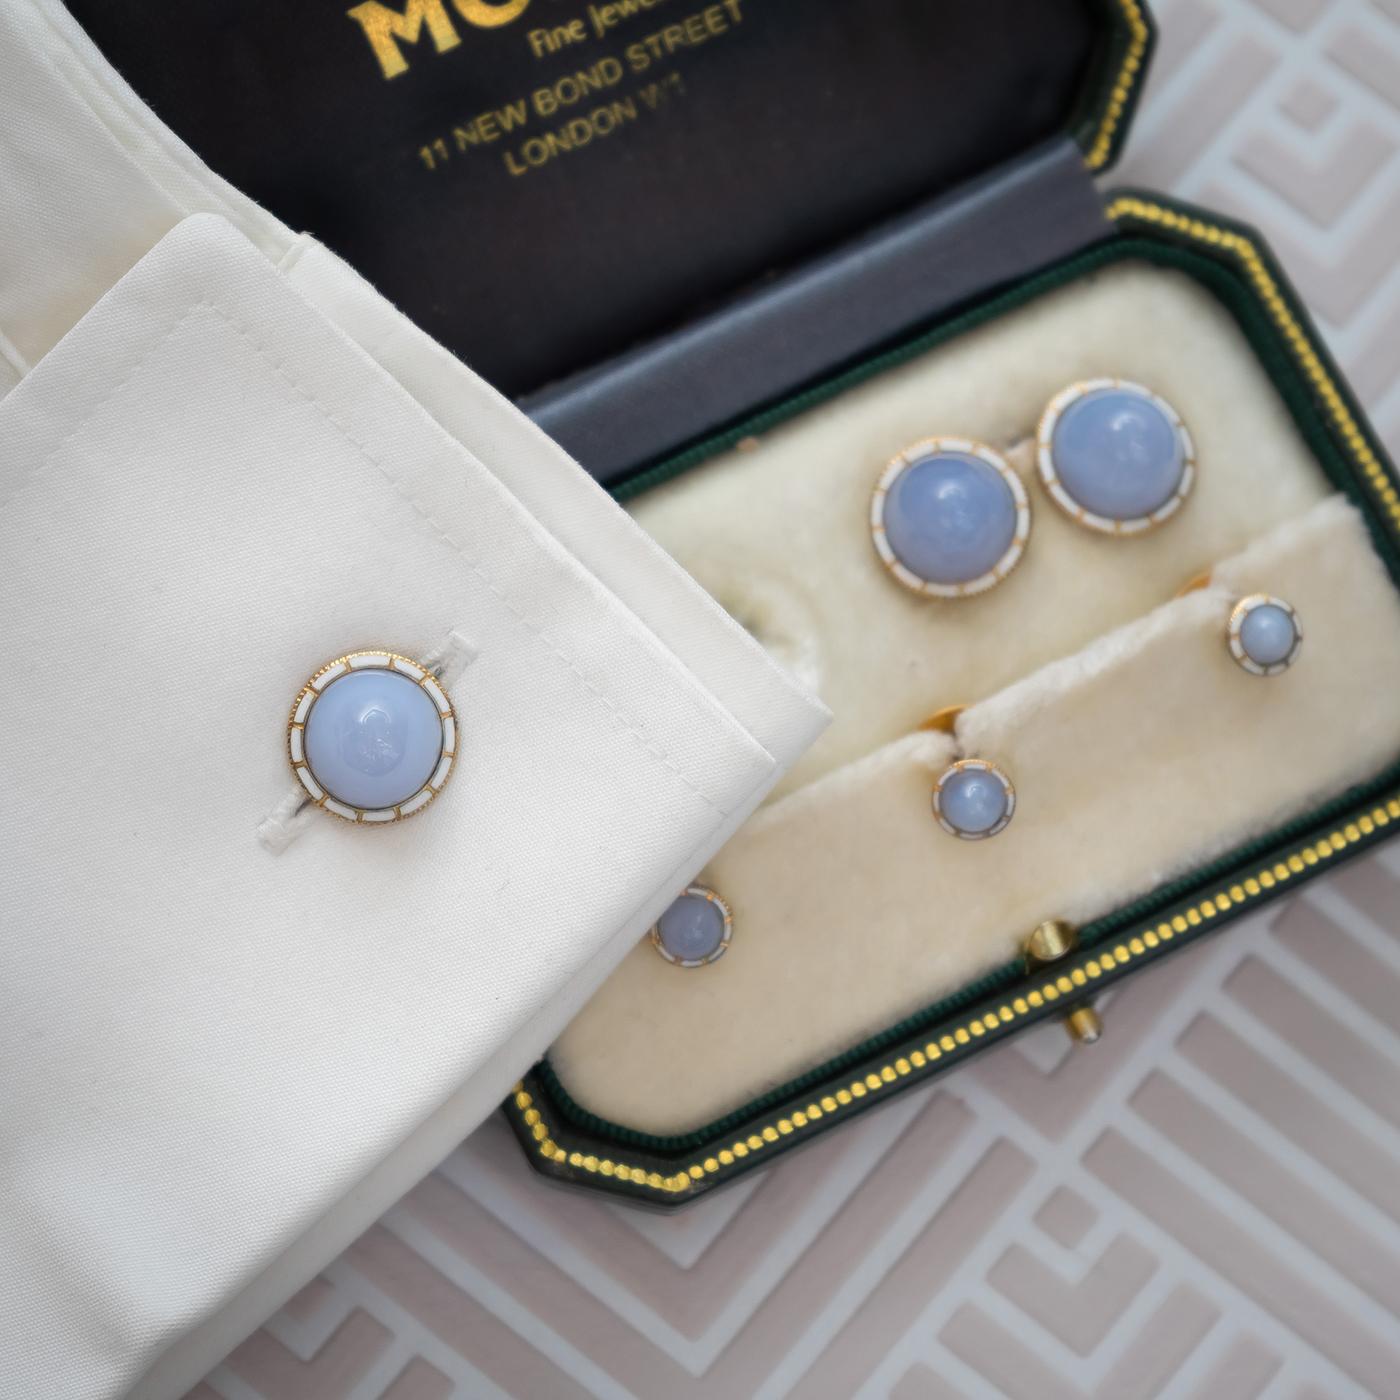 An English, antique, gentleman's dress set, with cabochon-cut blue lace agate and white enamel surrounds, on 15ct gold, comprising of a pair of cufflinks and three studs. Circa 1900.